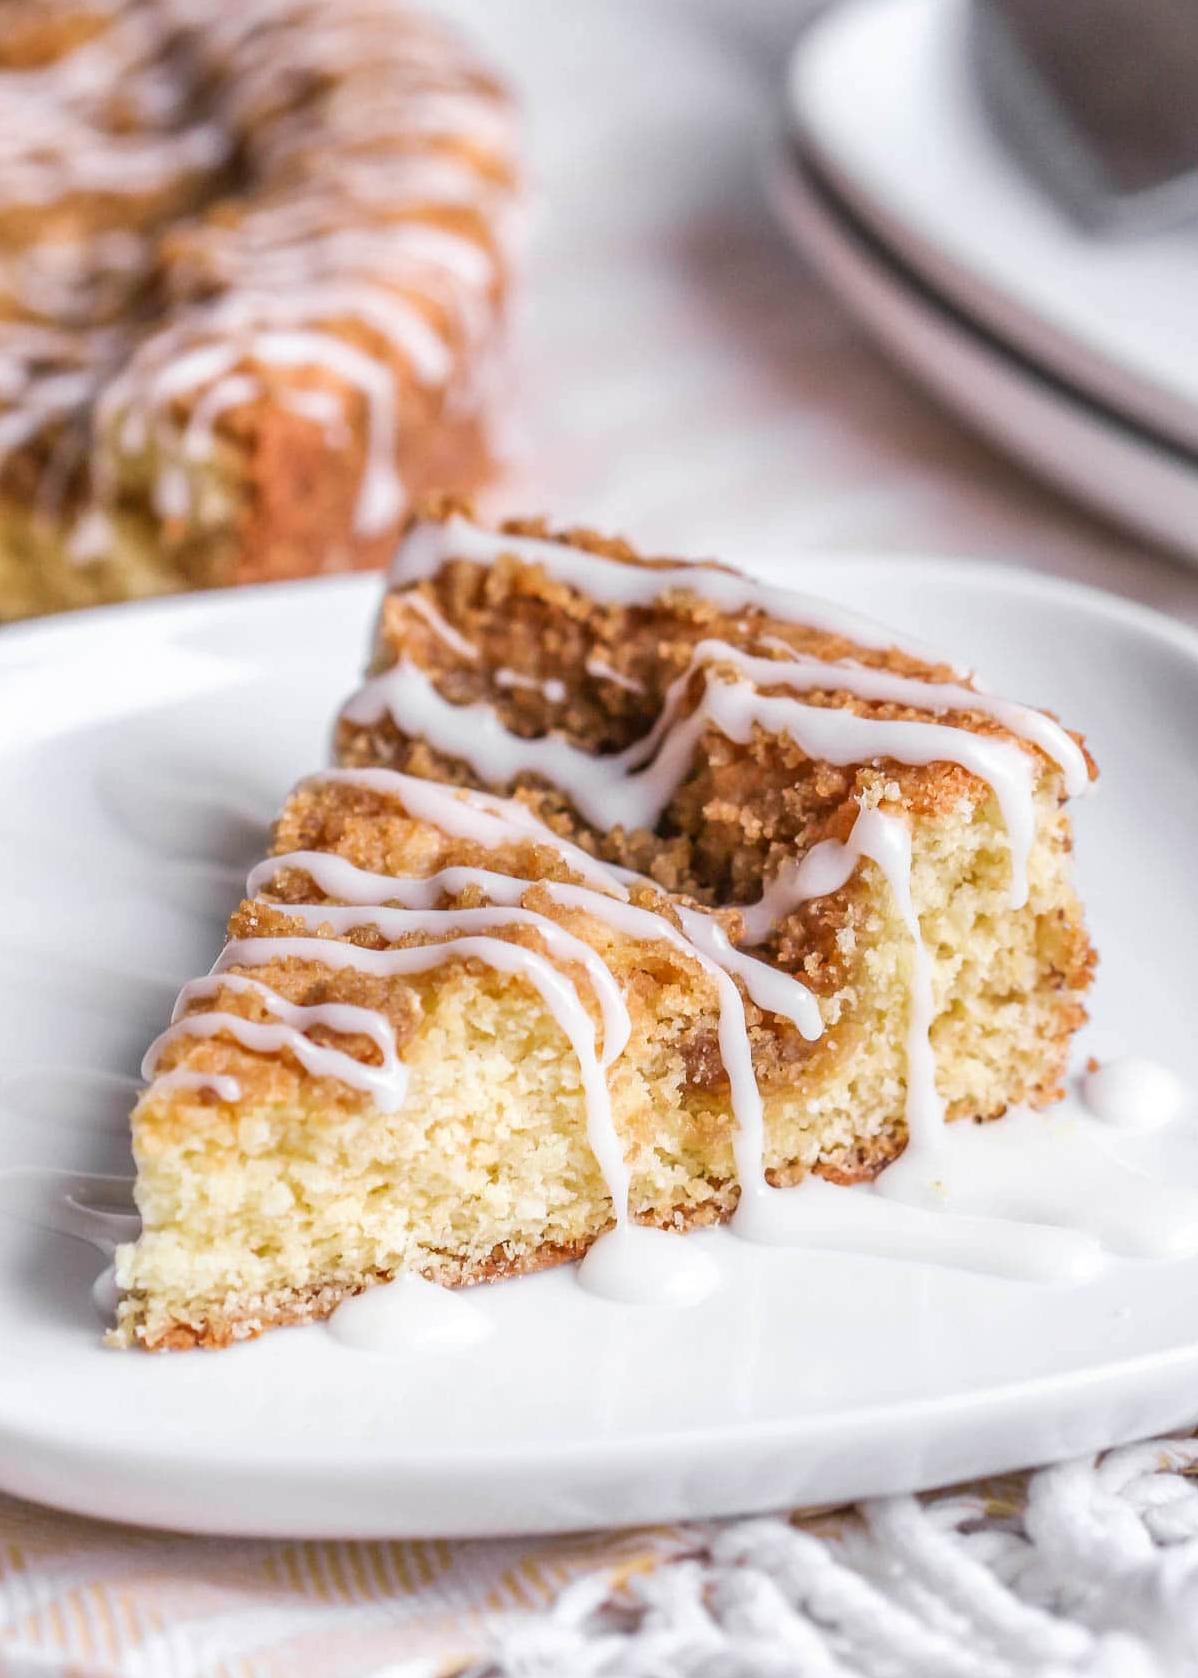  Get ready for a flavor explosion on top of your favorite coffee cake.